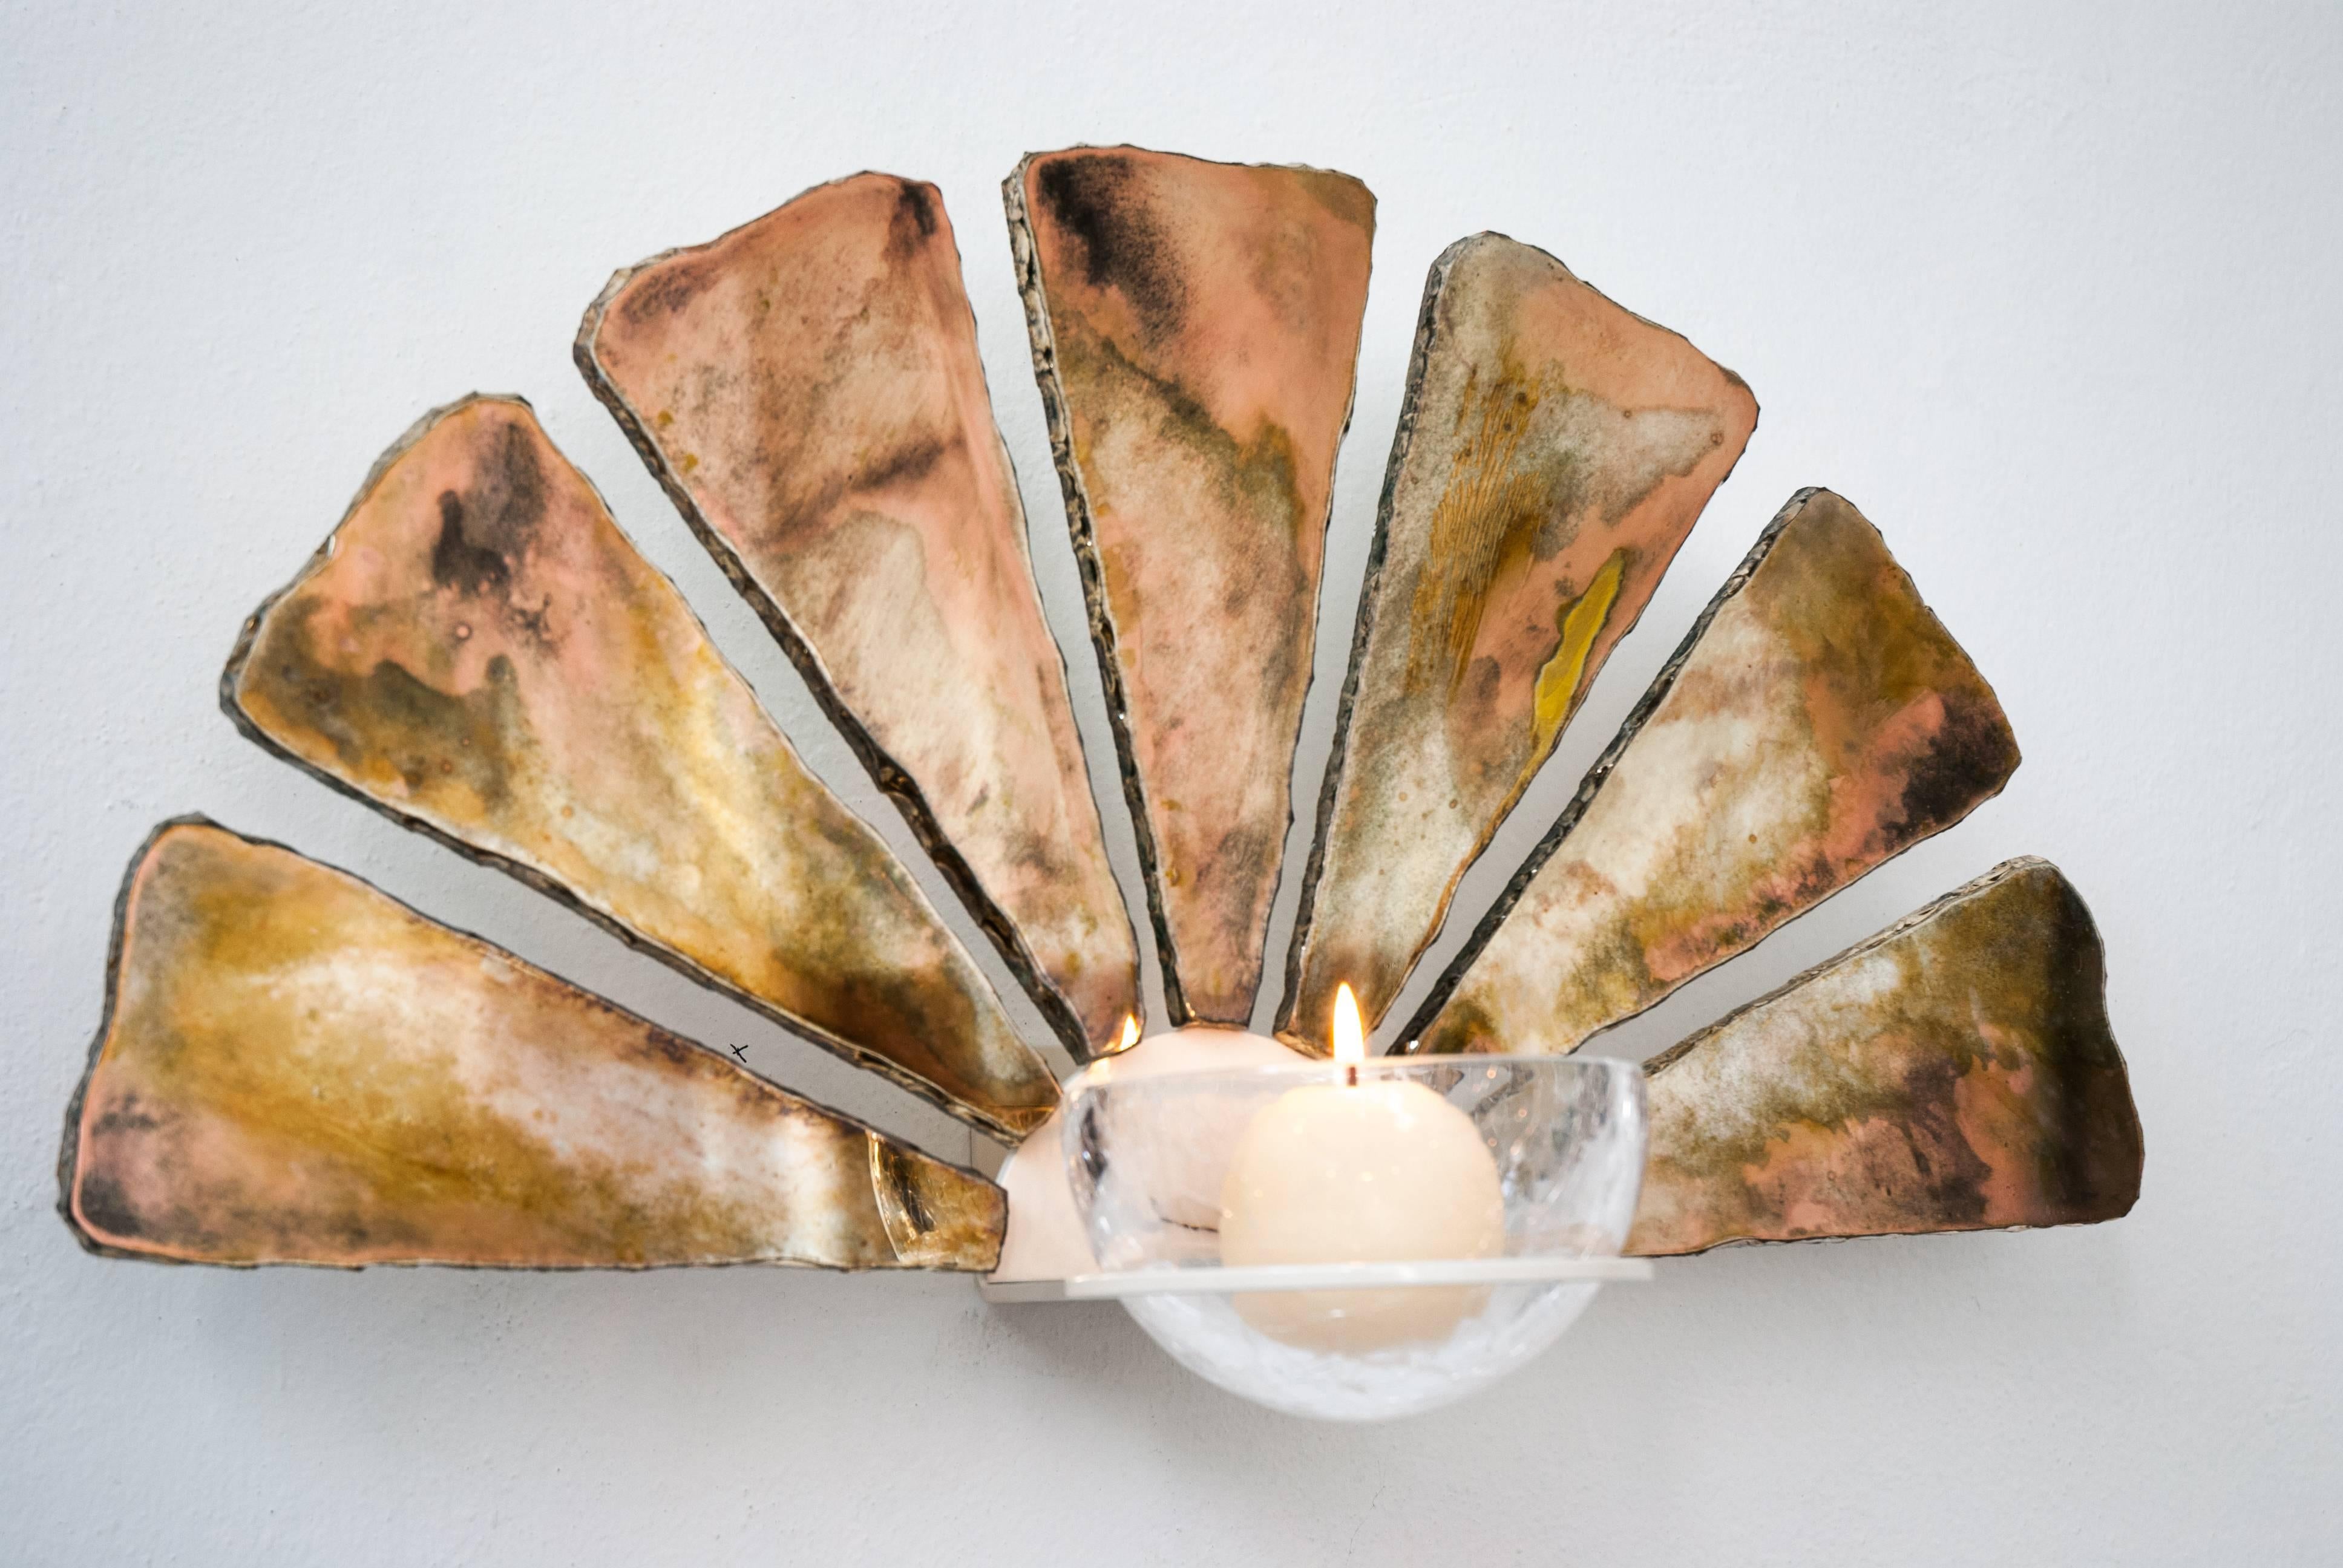 Little fan wall sconce lighted with led light on the back side, with candle holder on the front side art glass, Sabrina’s silvering, ivory metal body. Suitable next to the bed as side bed lighting, on a corridor next to a mirror or a painting.